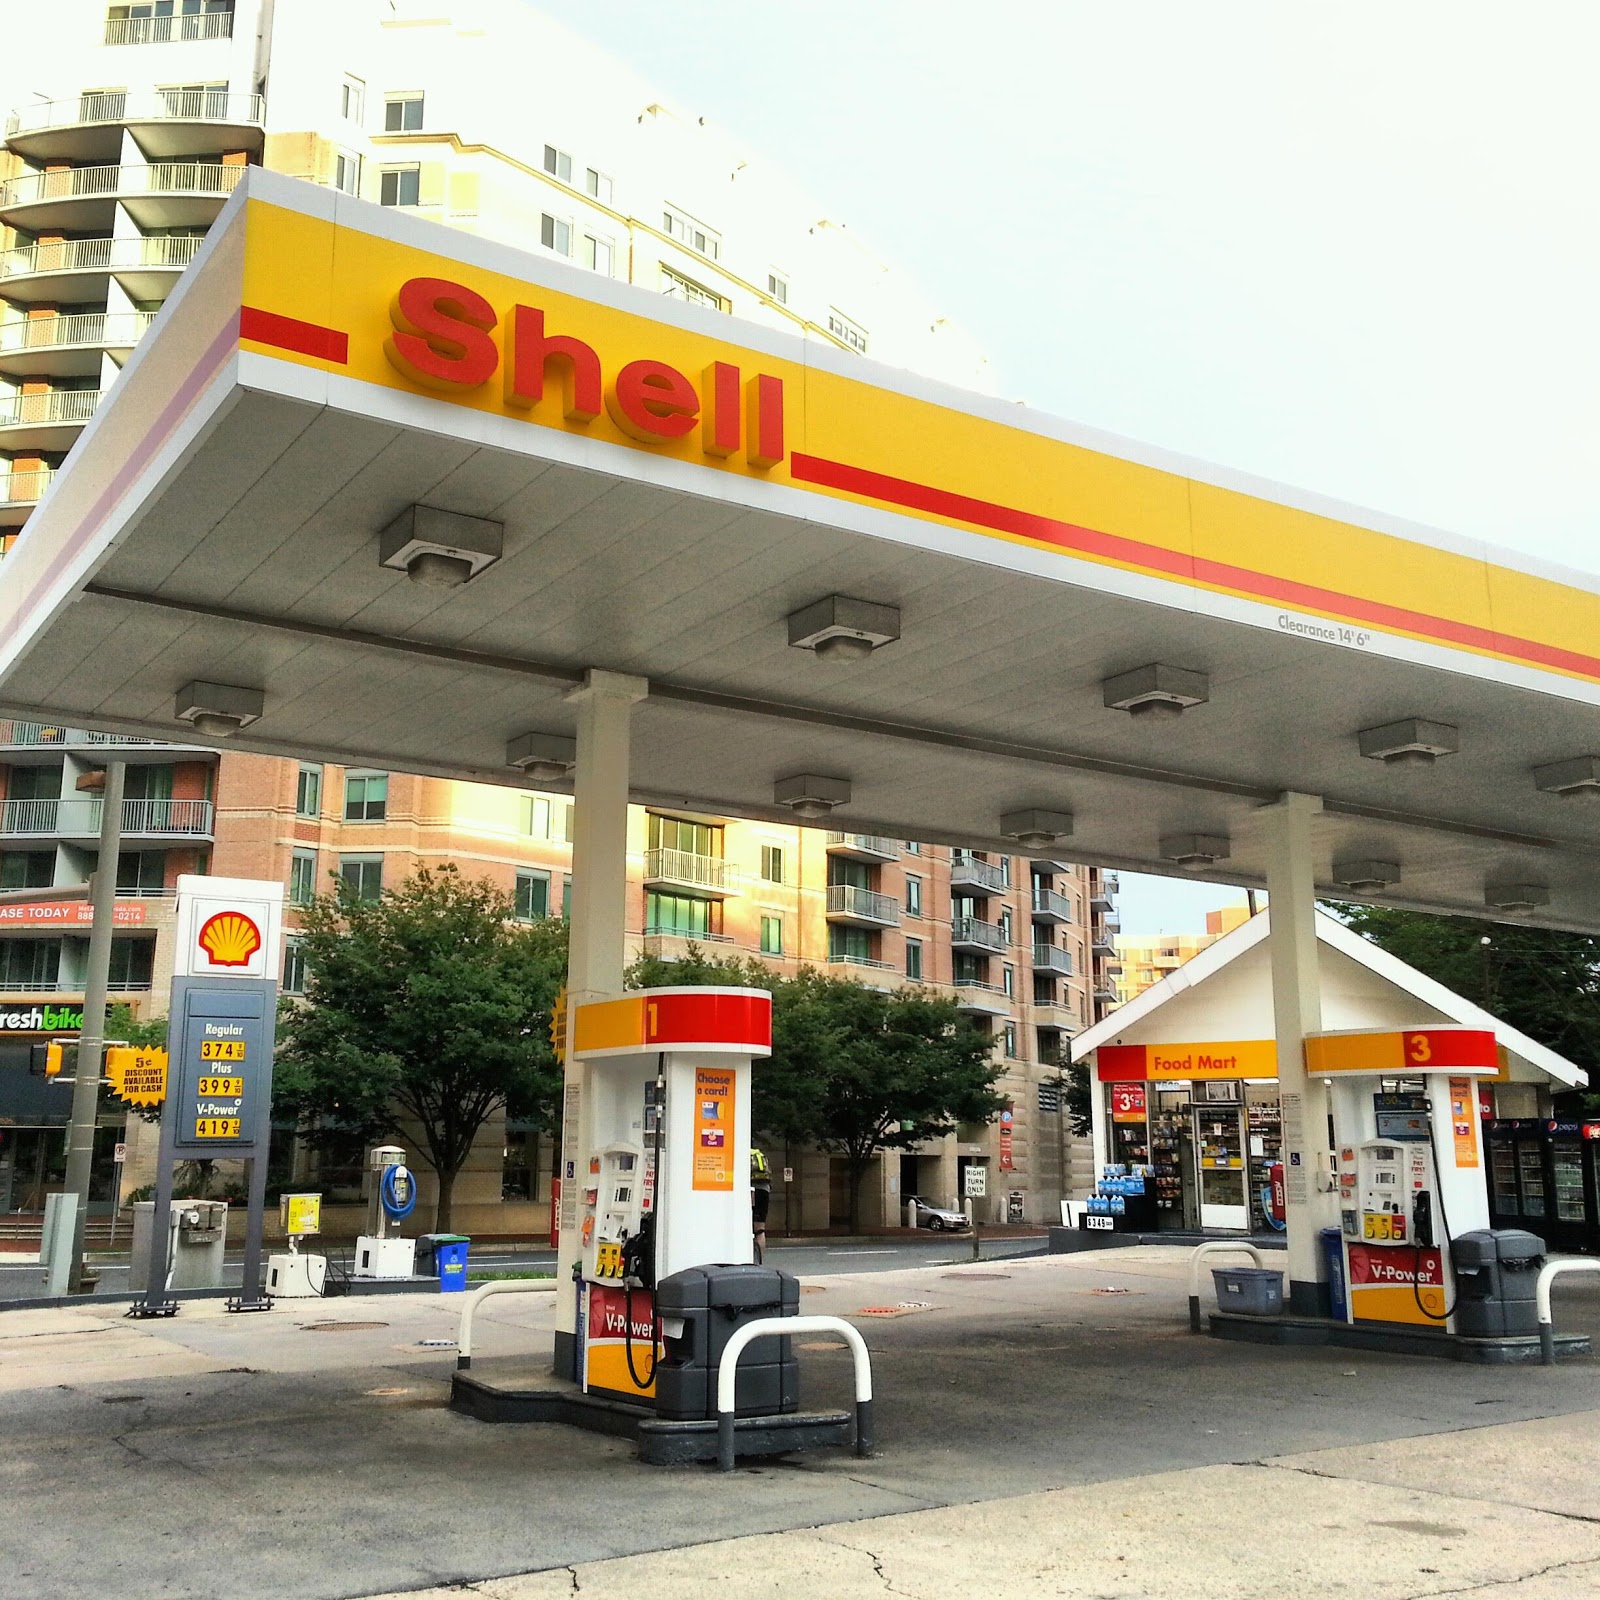 Robert Dyer @ Row: SHELL GAS STATION AT 7628 OLD GEORGETOWN ROAD TO BE (PHOTOS)